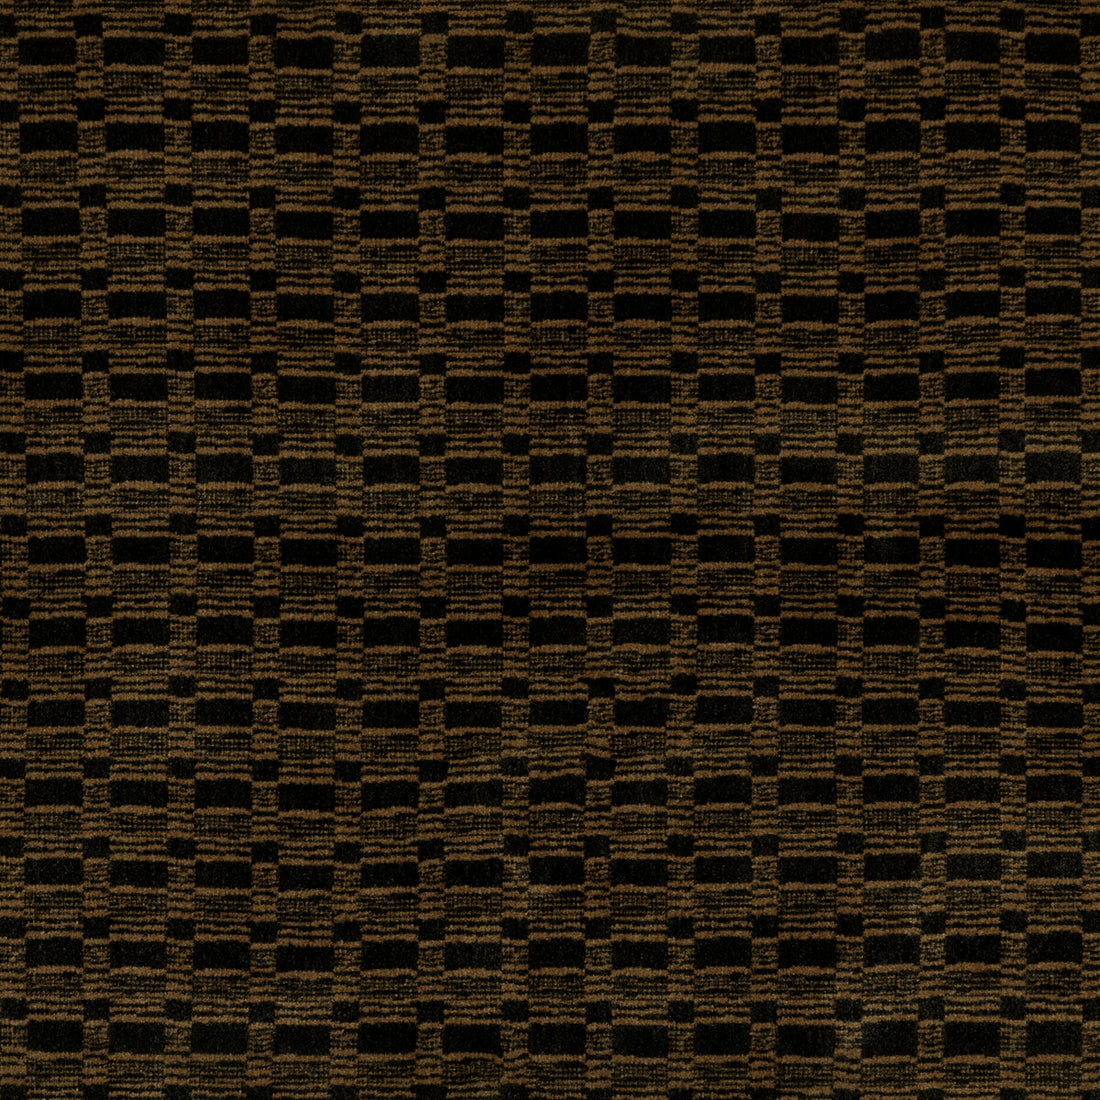 Lure fabric in shadow/charcoal color - pattern GWF-3760.846.0 - by Lee Jofa Modern in the Kelly Wearstler VI collection